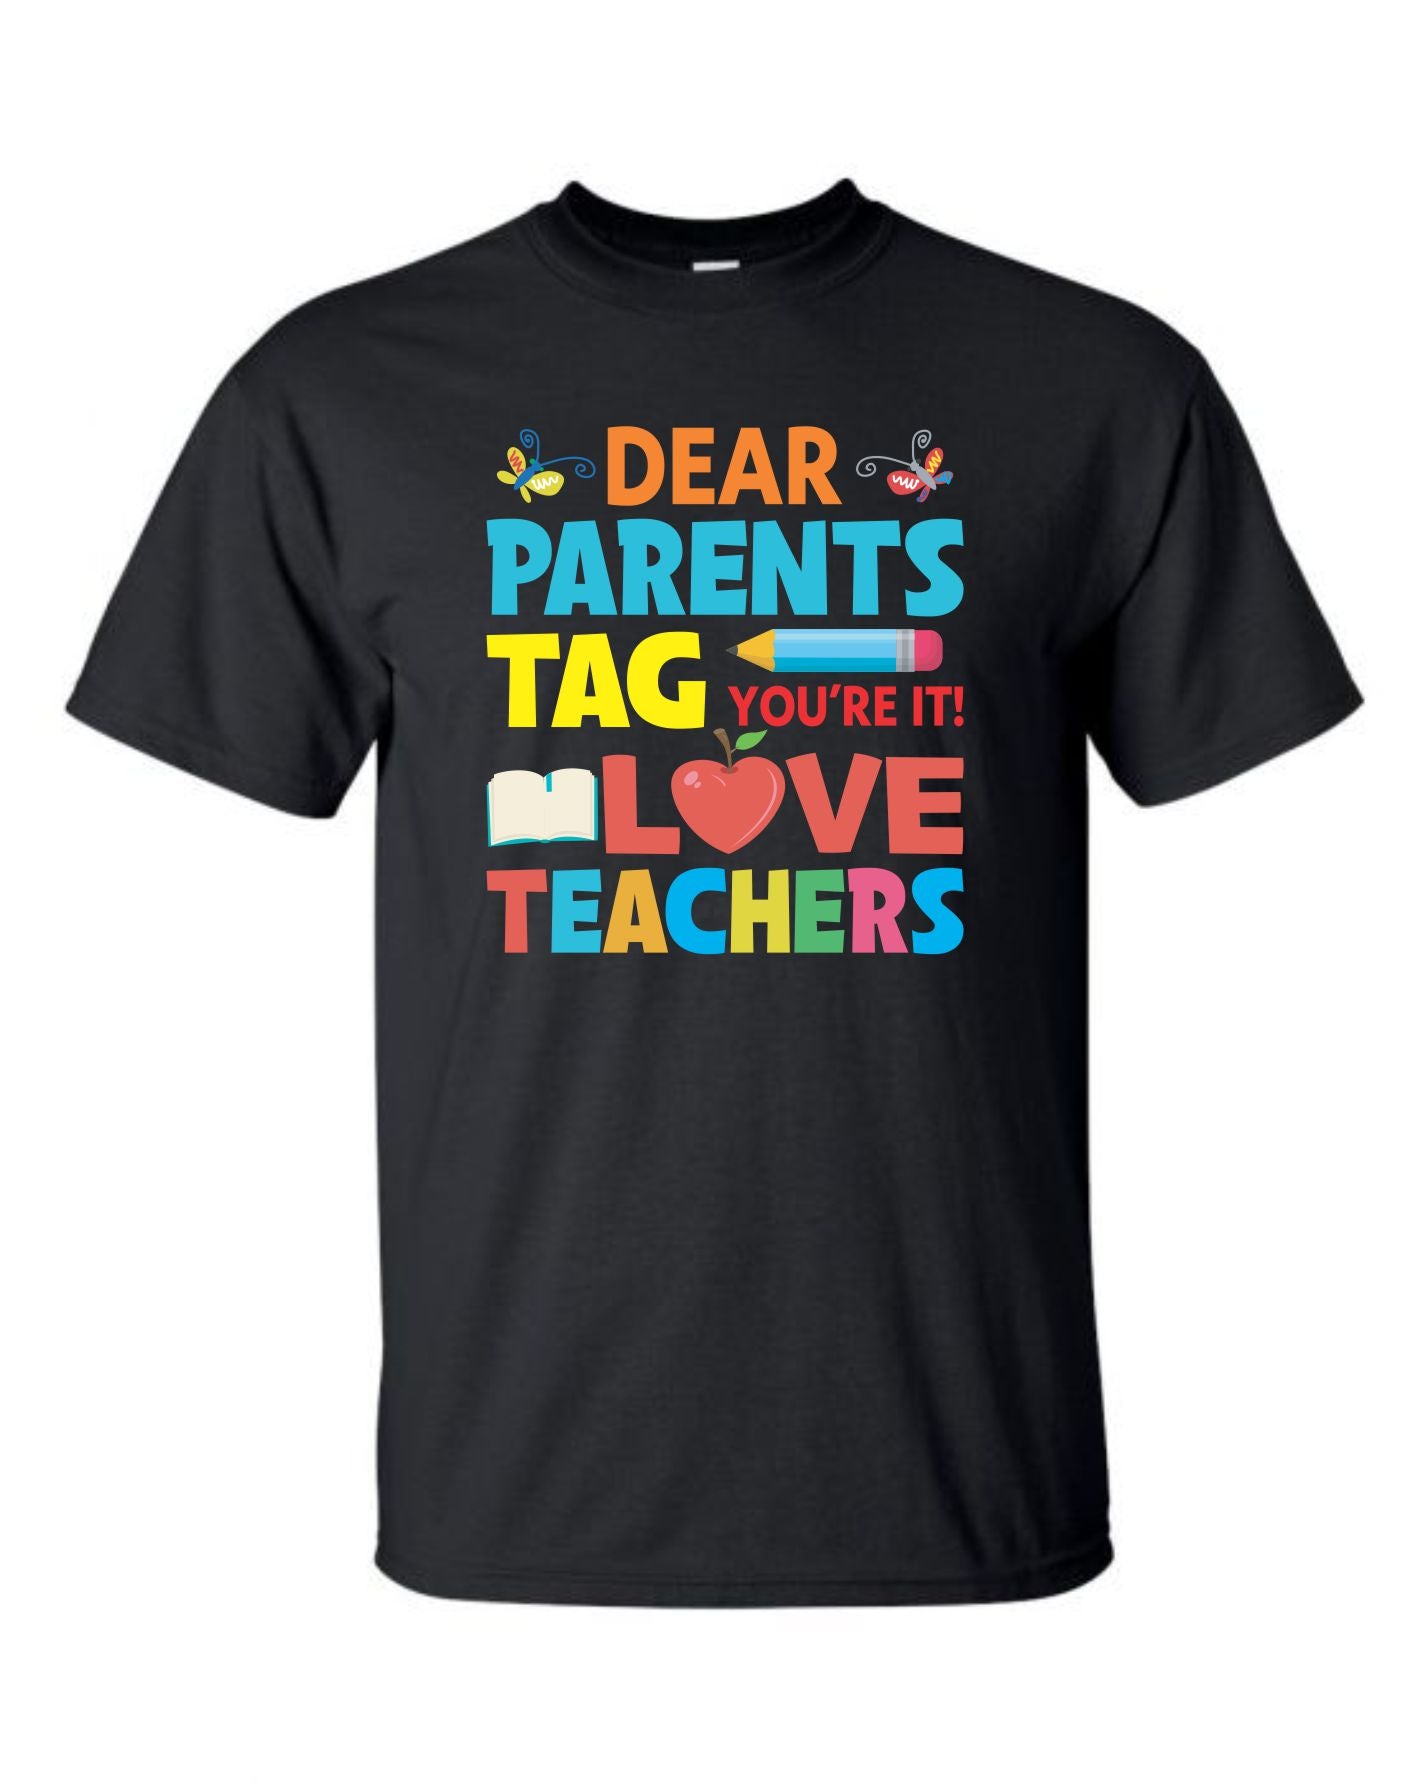 Parents Tag You're It - End of Year Teacher Shirt